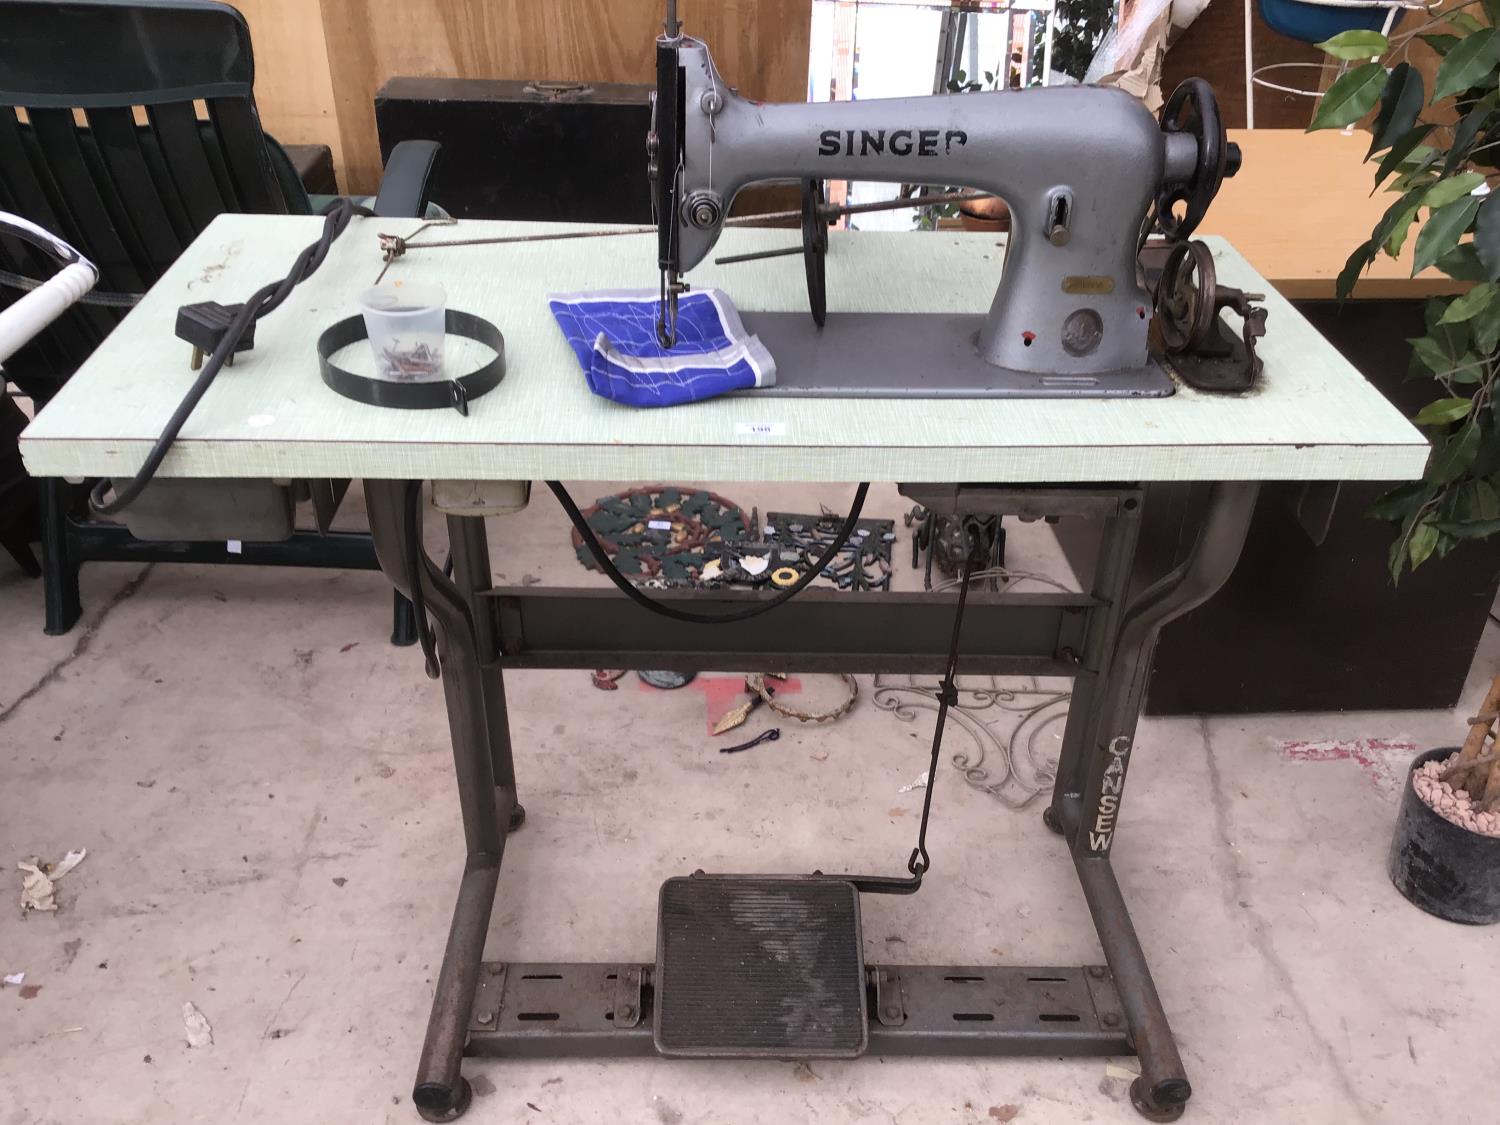 AN INDUSTRIAL SINGER SEWING MACHINE IN WORKING ORDER